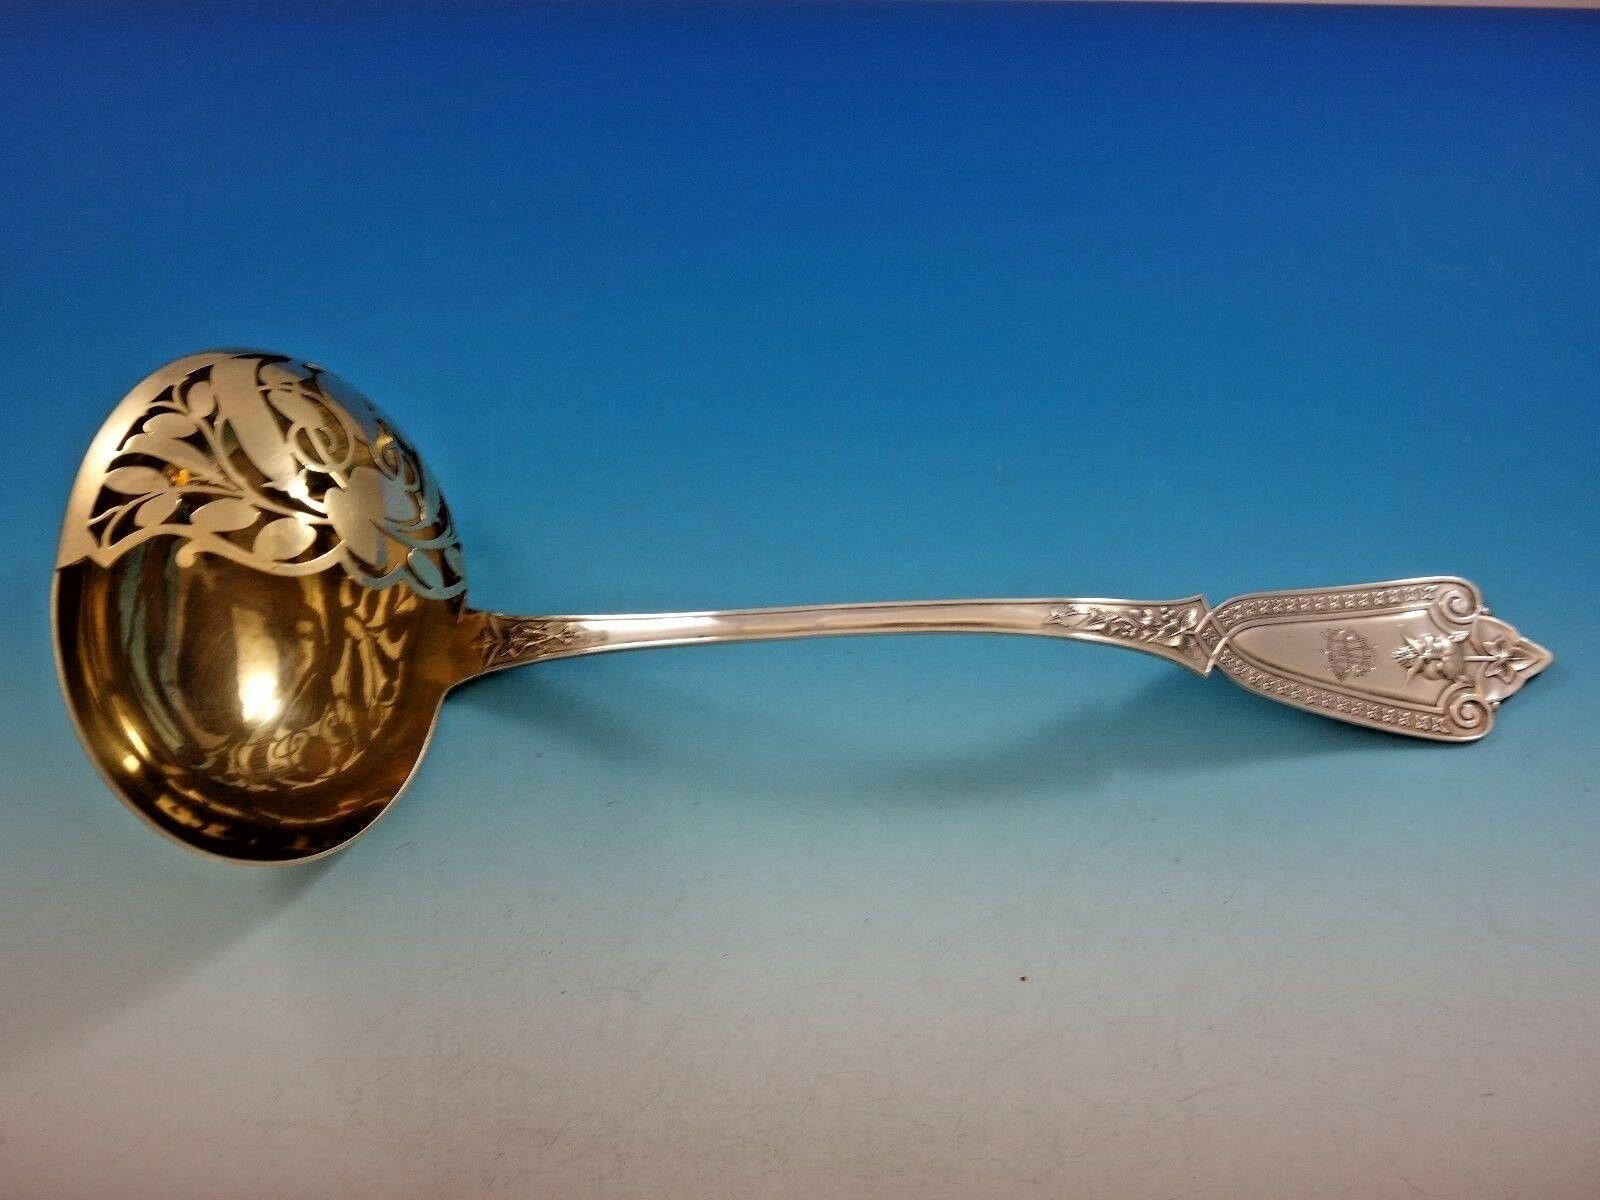 Ivy by Whiting / Hebbard

Sterling silver soup ladle, gold-washed, 12